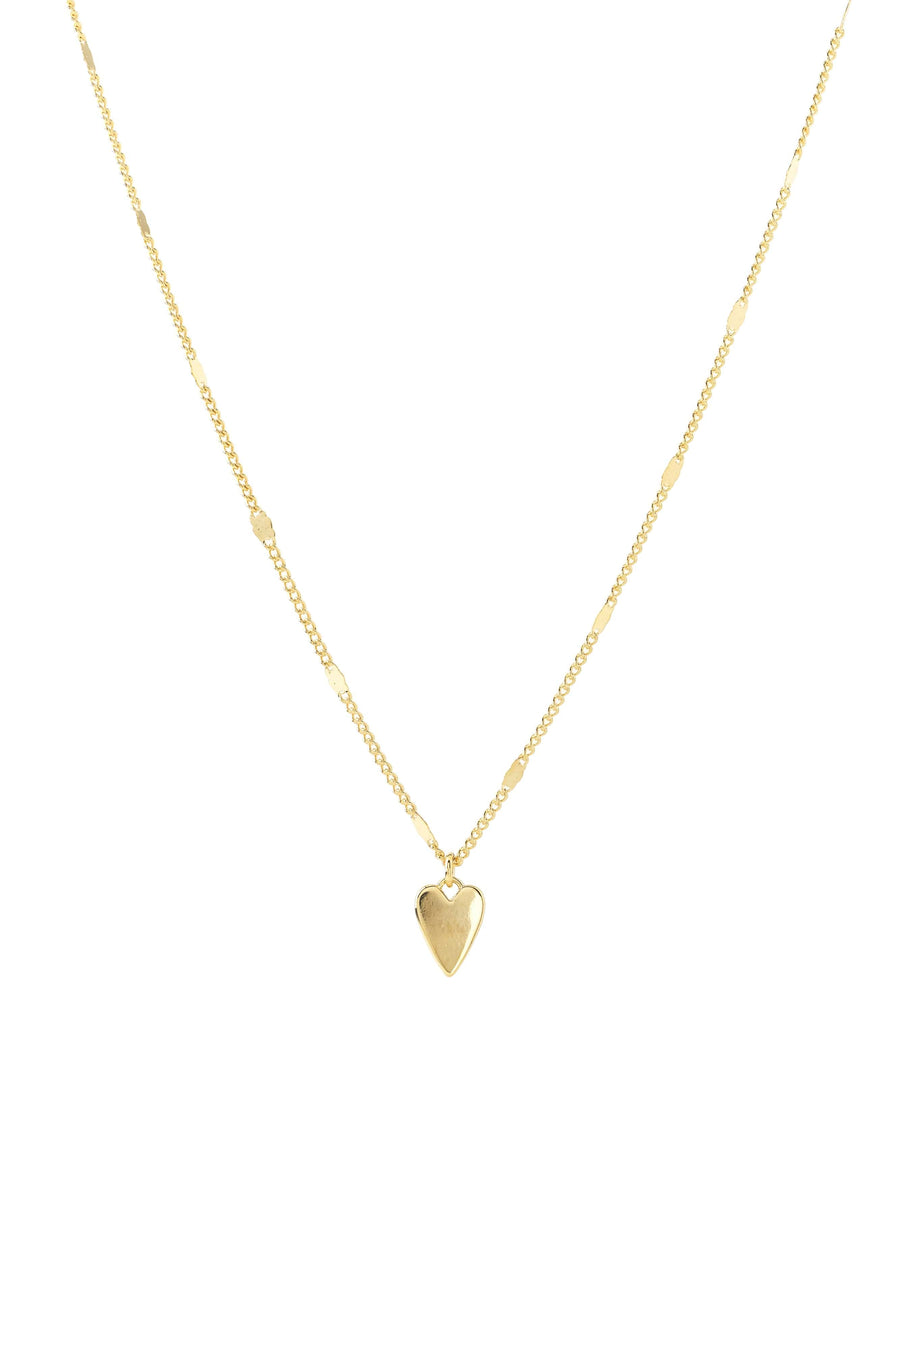 Everly Heart Necklace – Lover's Tempo